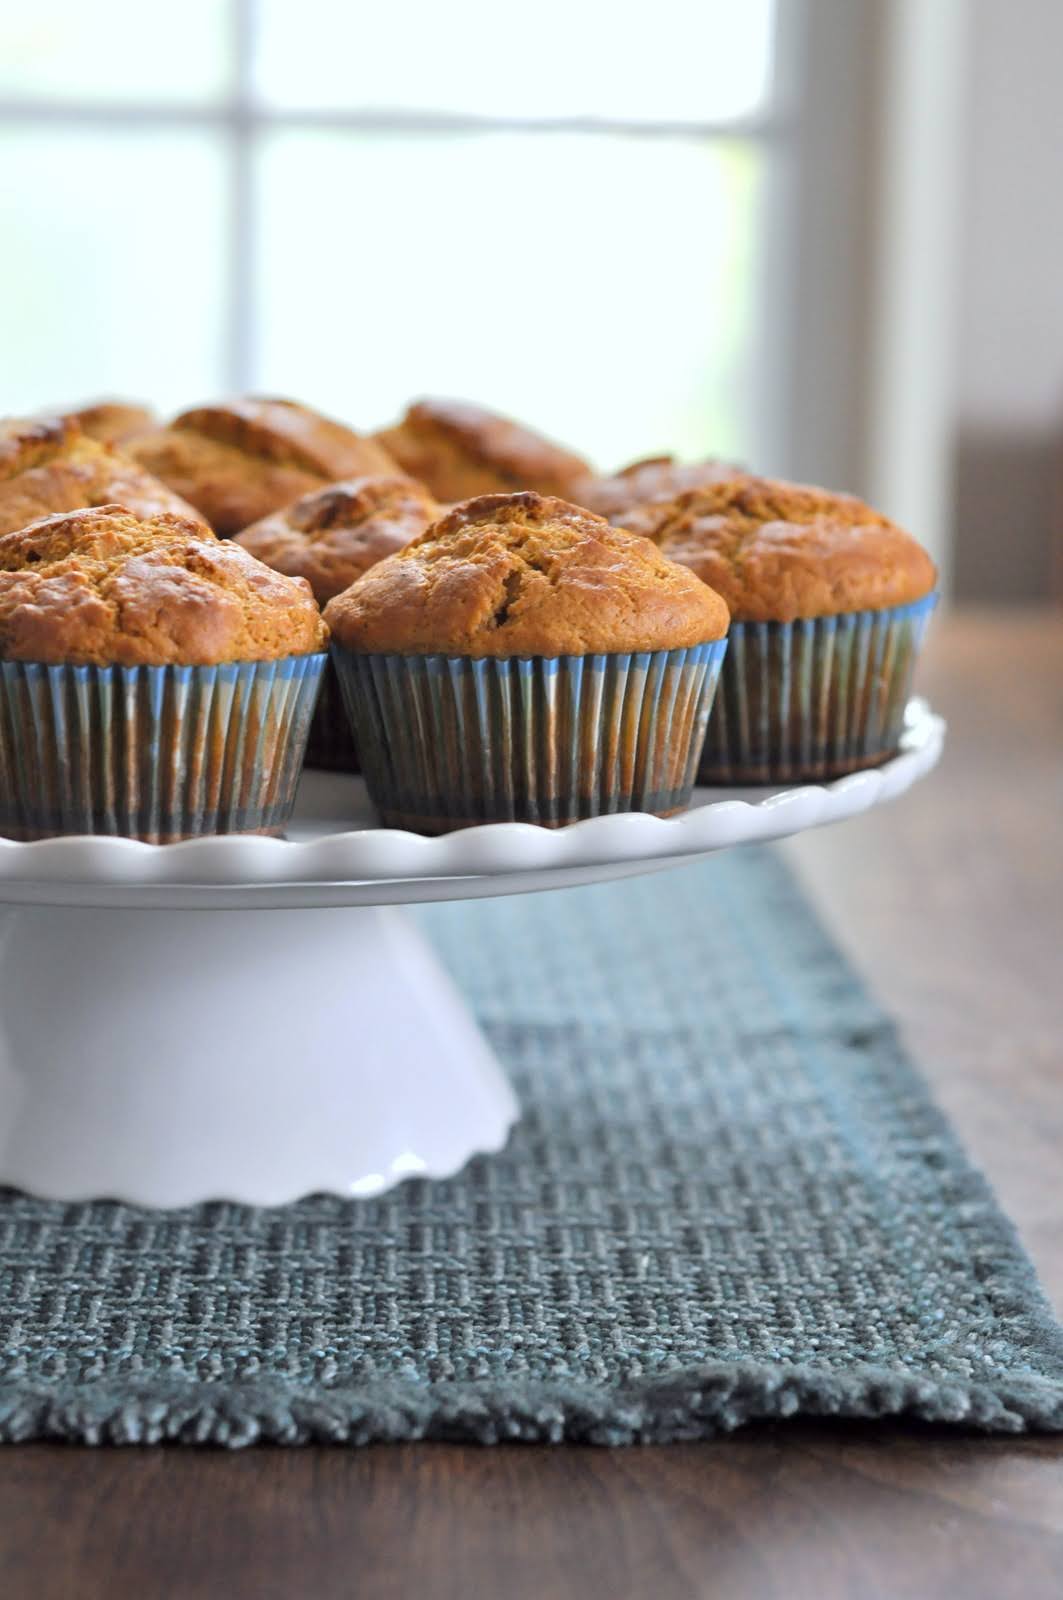 Ginger-Spiced Sweet Potato Muffins | Taste As You Go